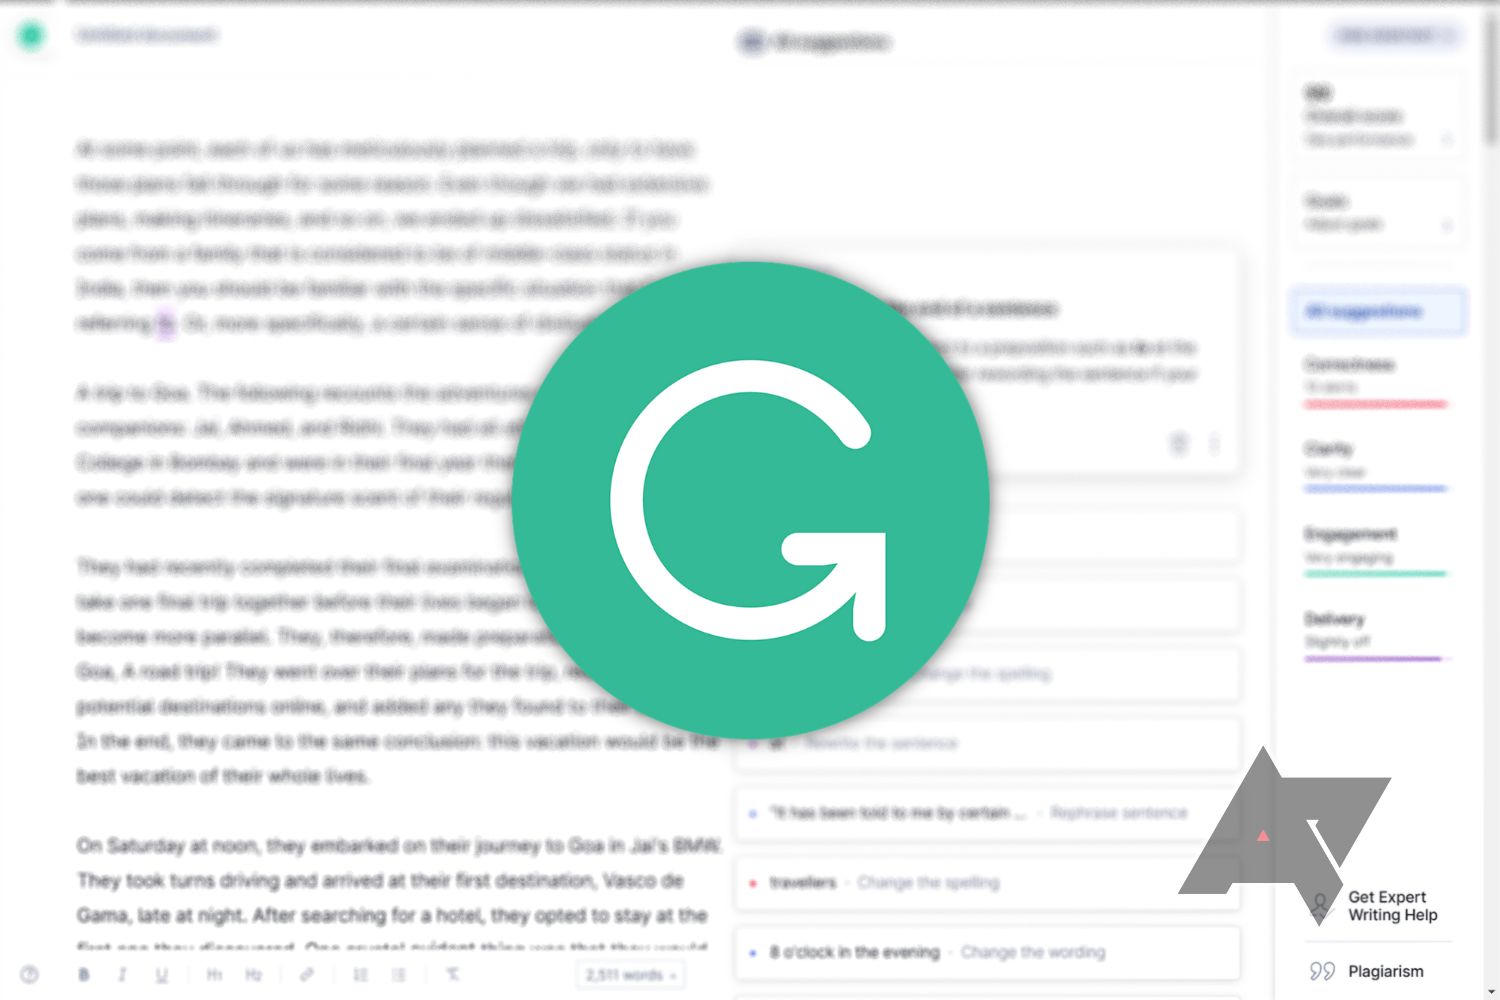 Grammarly Free vs Premium: What's the Difference?